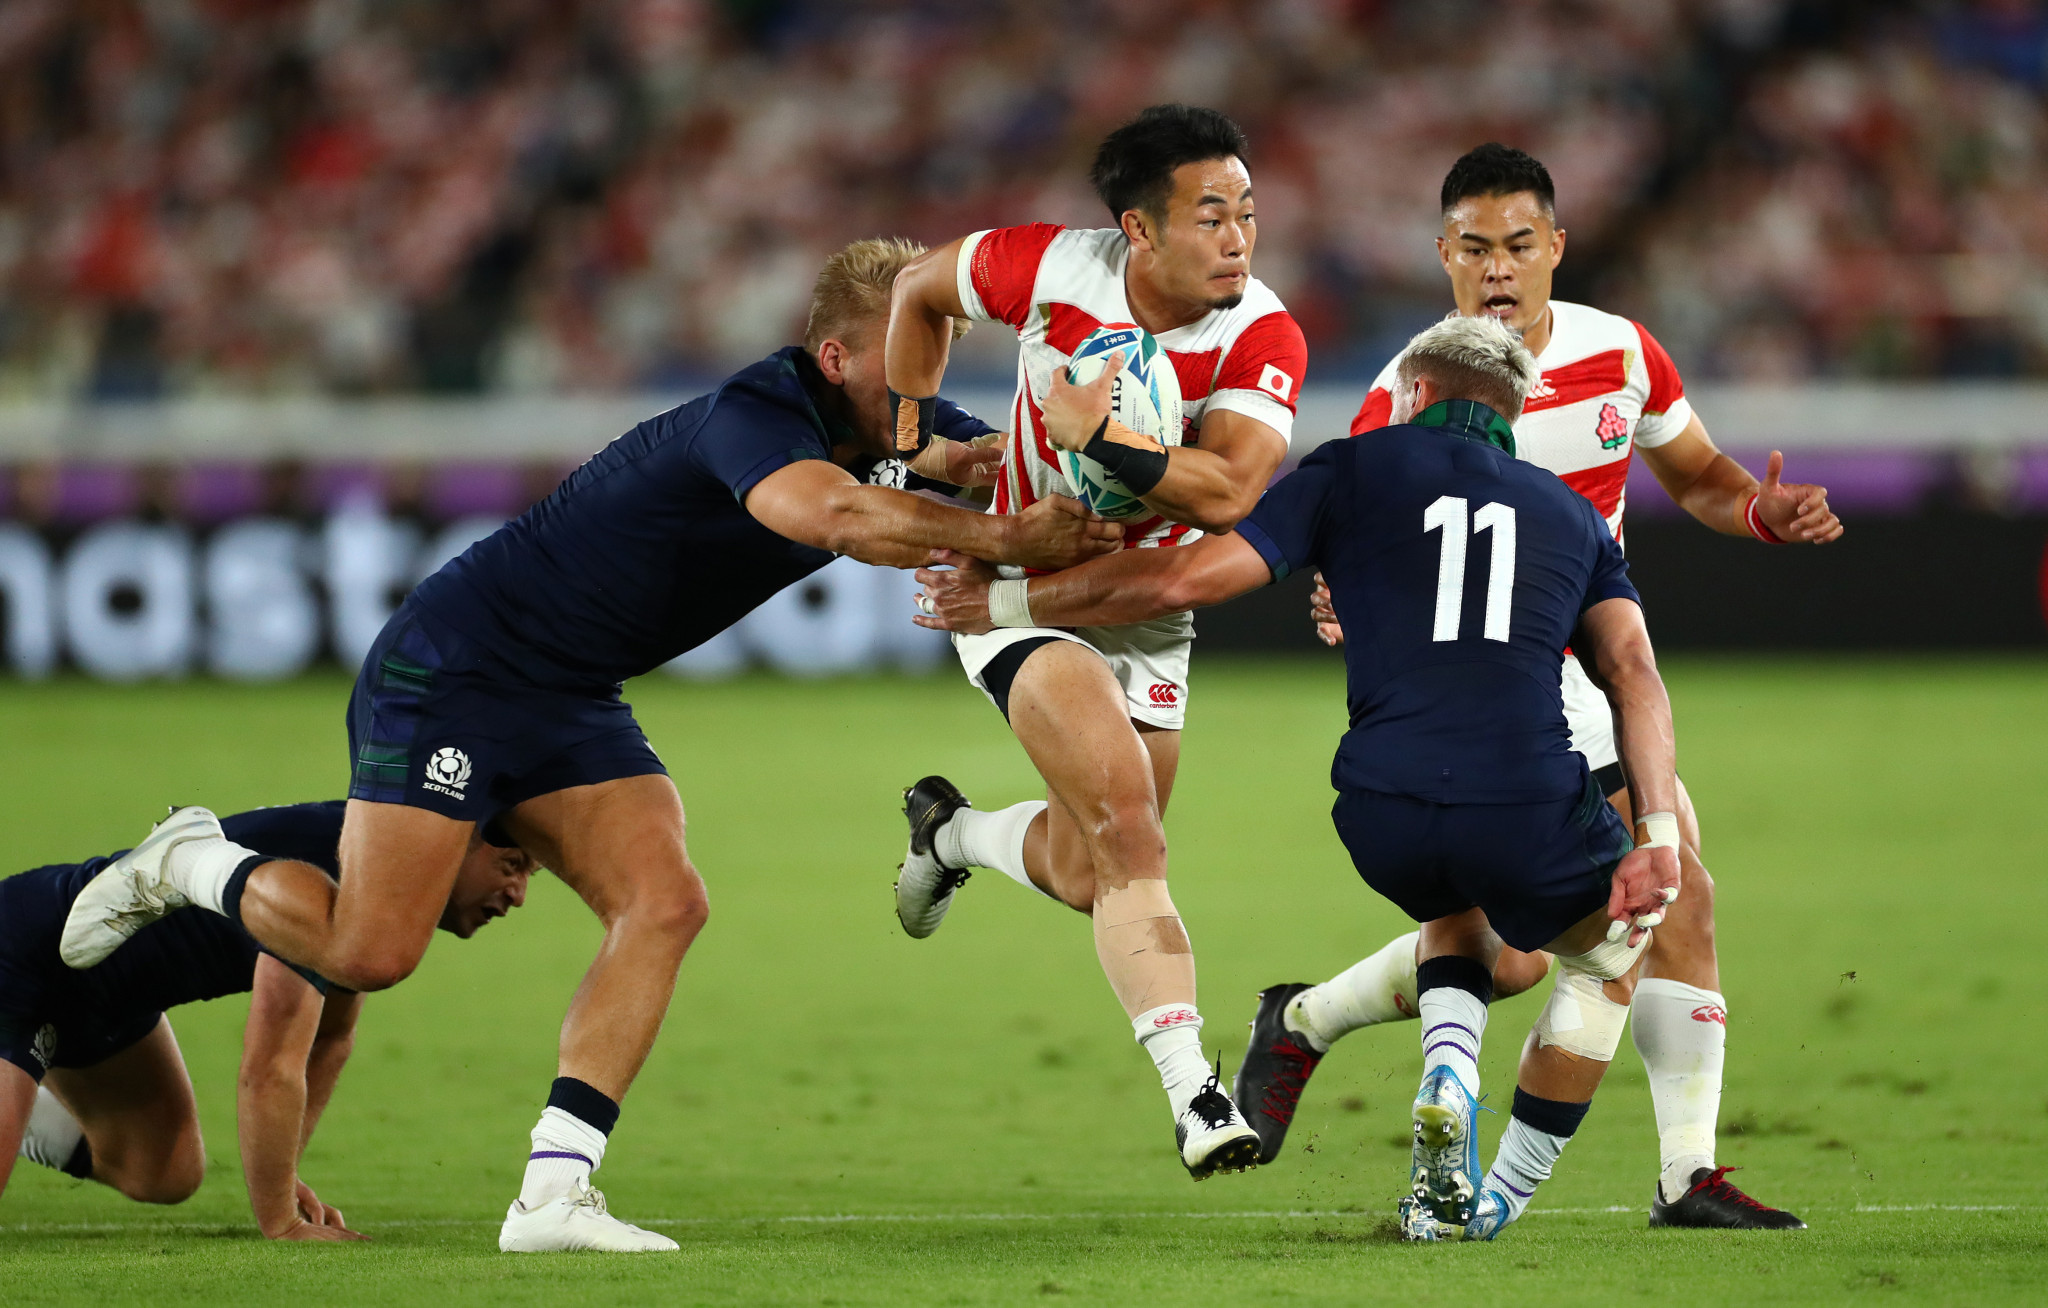 There was big growth in host nation Japan after their superb run to the quarter-finals ©Getty Images